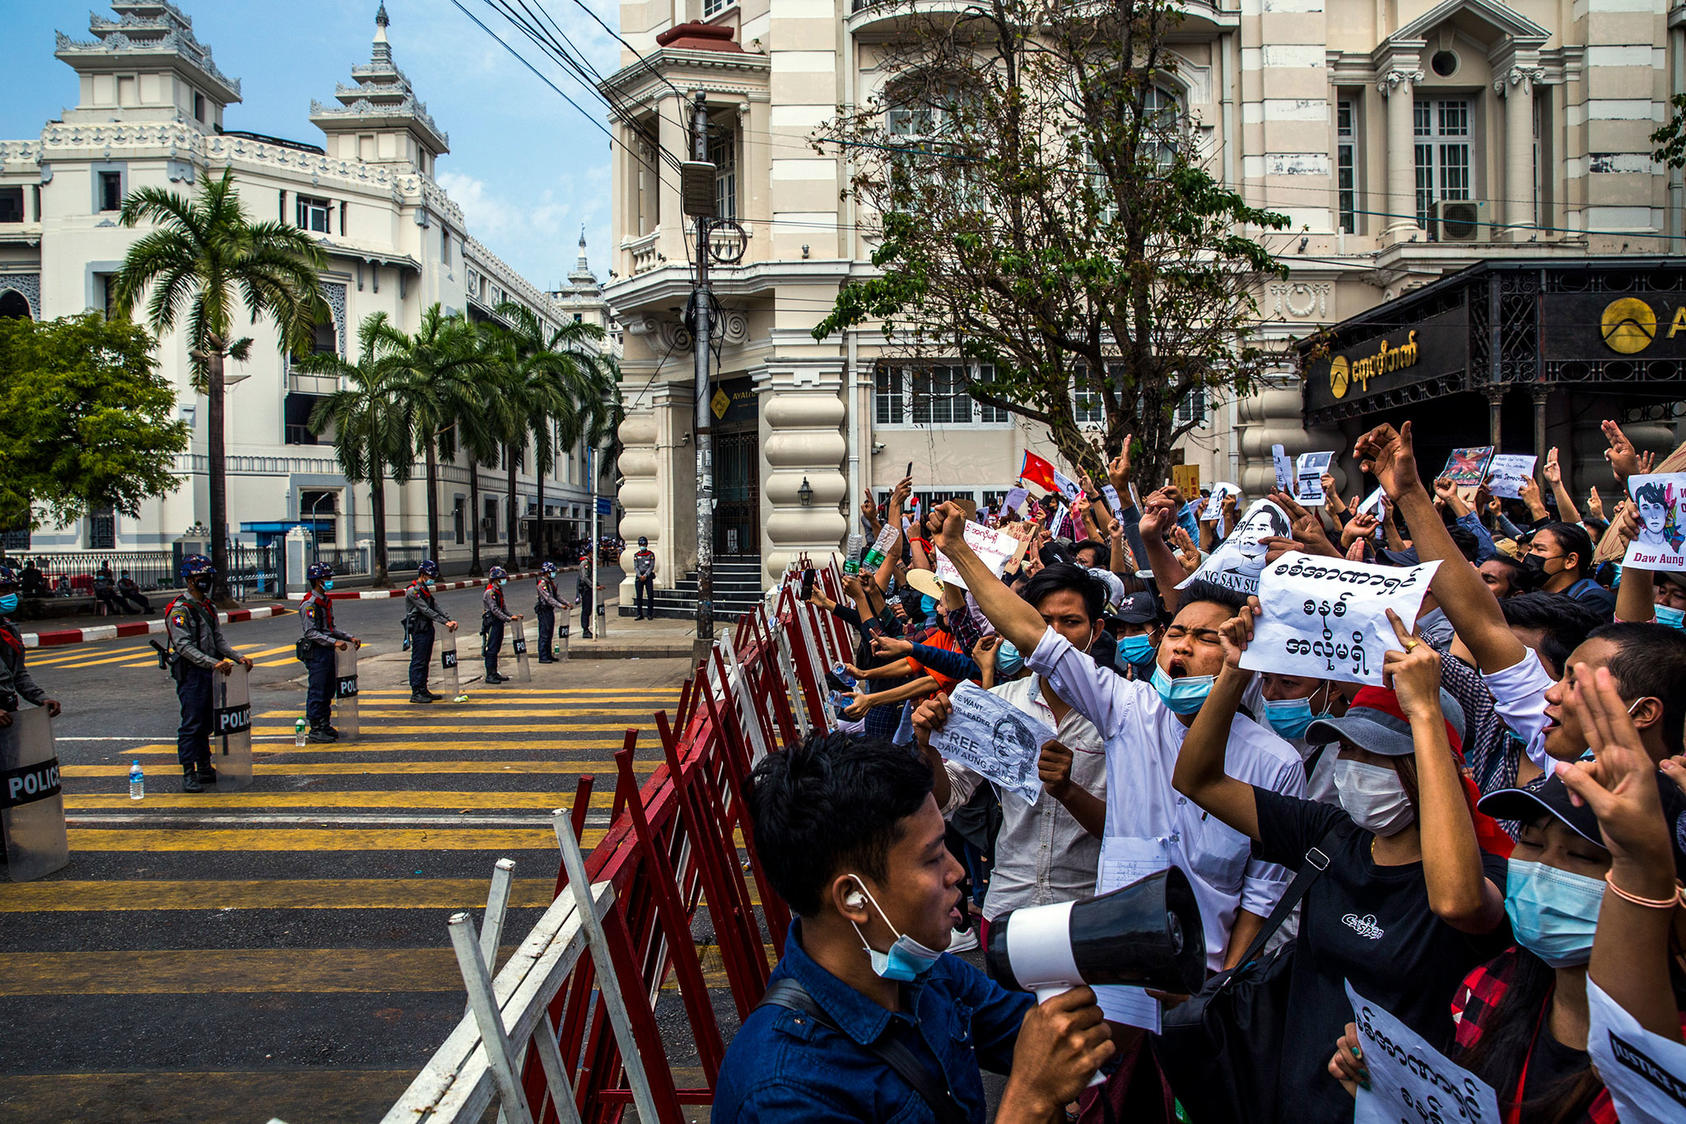 Protesters demonstrate after the military regime took power through a coup in Yangon Myanmar, Feb. 8, 2021. (The New York Times)